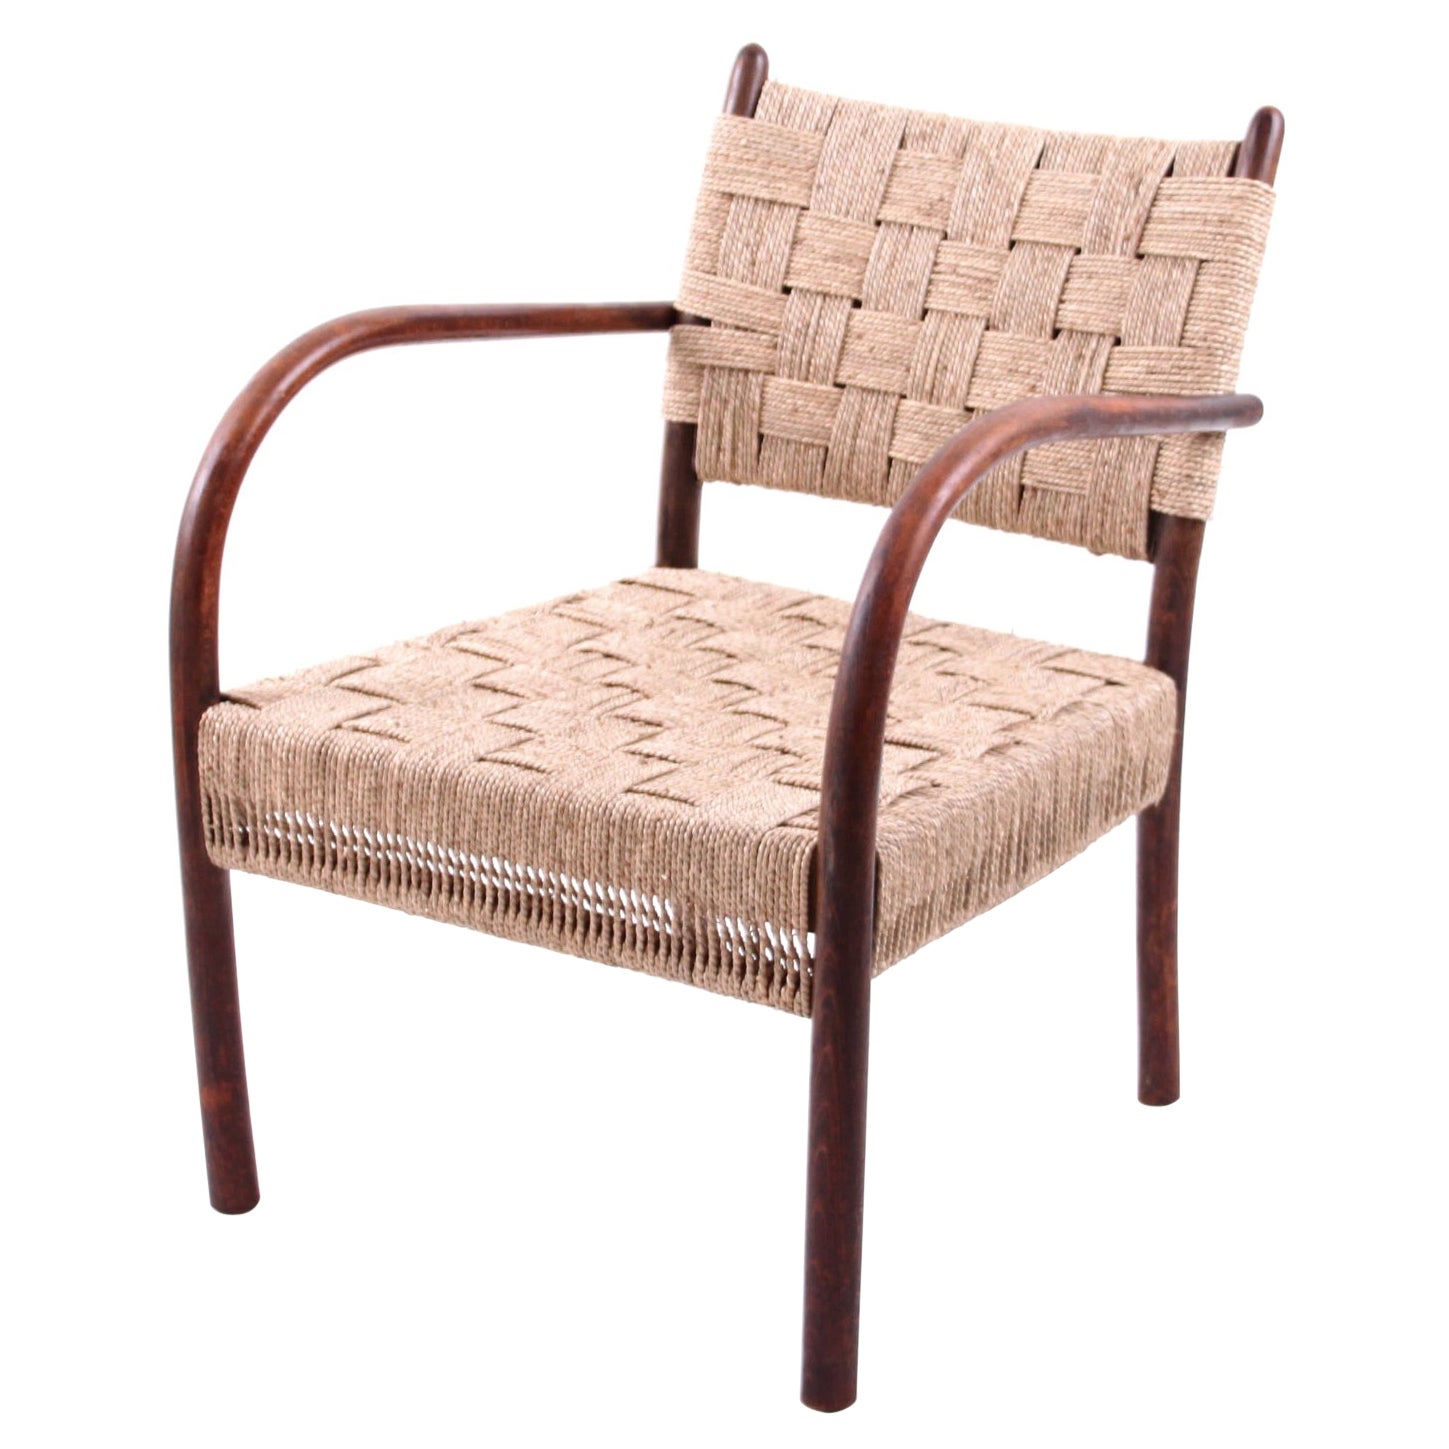 K. Scröder Armchair, Stained Beech and Woven Seagrass, Denmark, 1930s